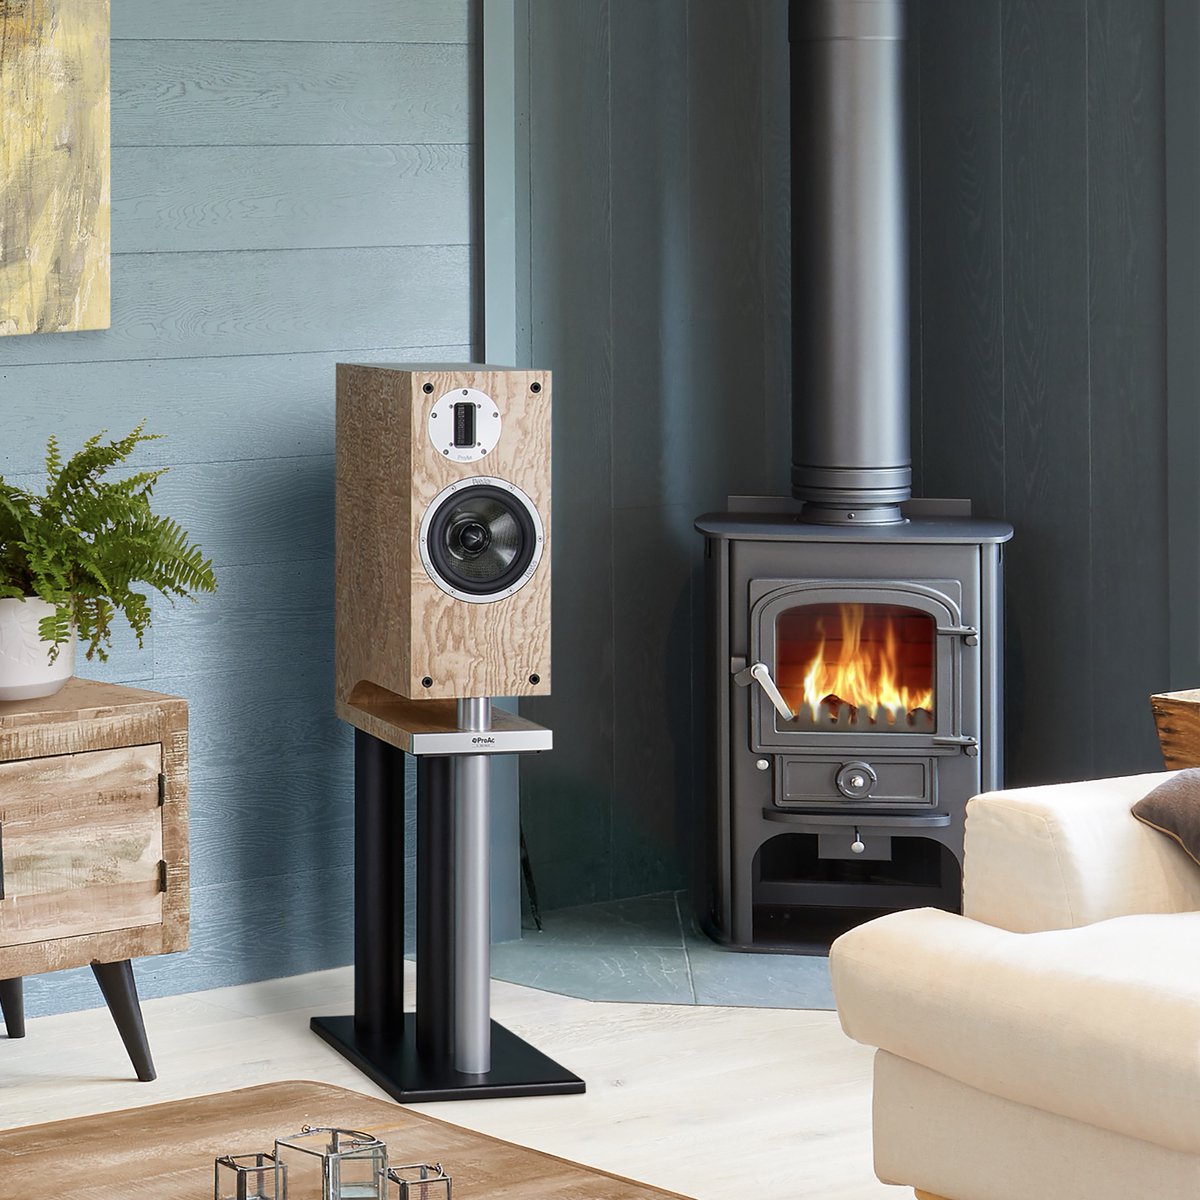 As the autumn nights draw in, it's time to get cosy, light a fire and play some of your favourite music... #autumnvibes #hifi #hifiaudio #speakers #loudspeakers #loudspeakerdesign #k1 #audio #weekendvibes #proacspeakers #perfectlynatural